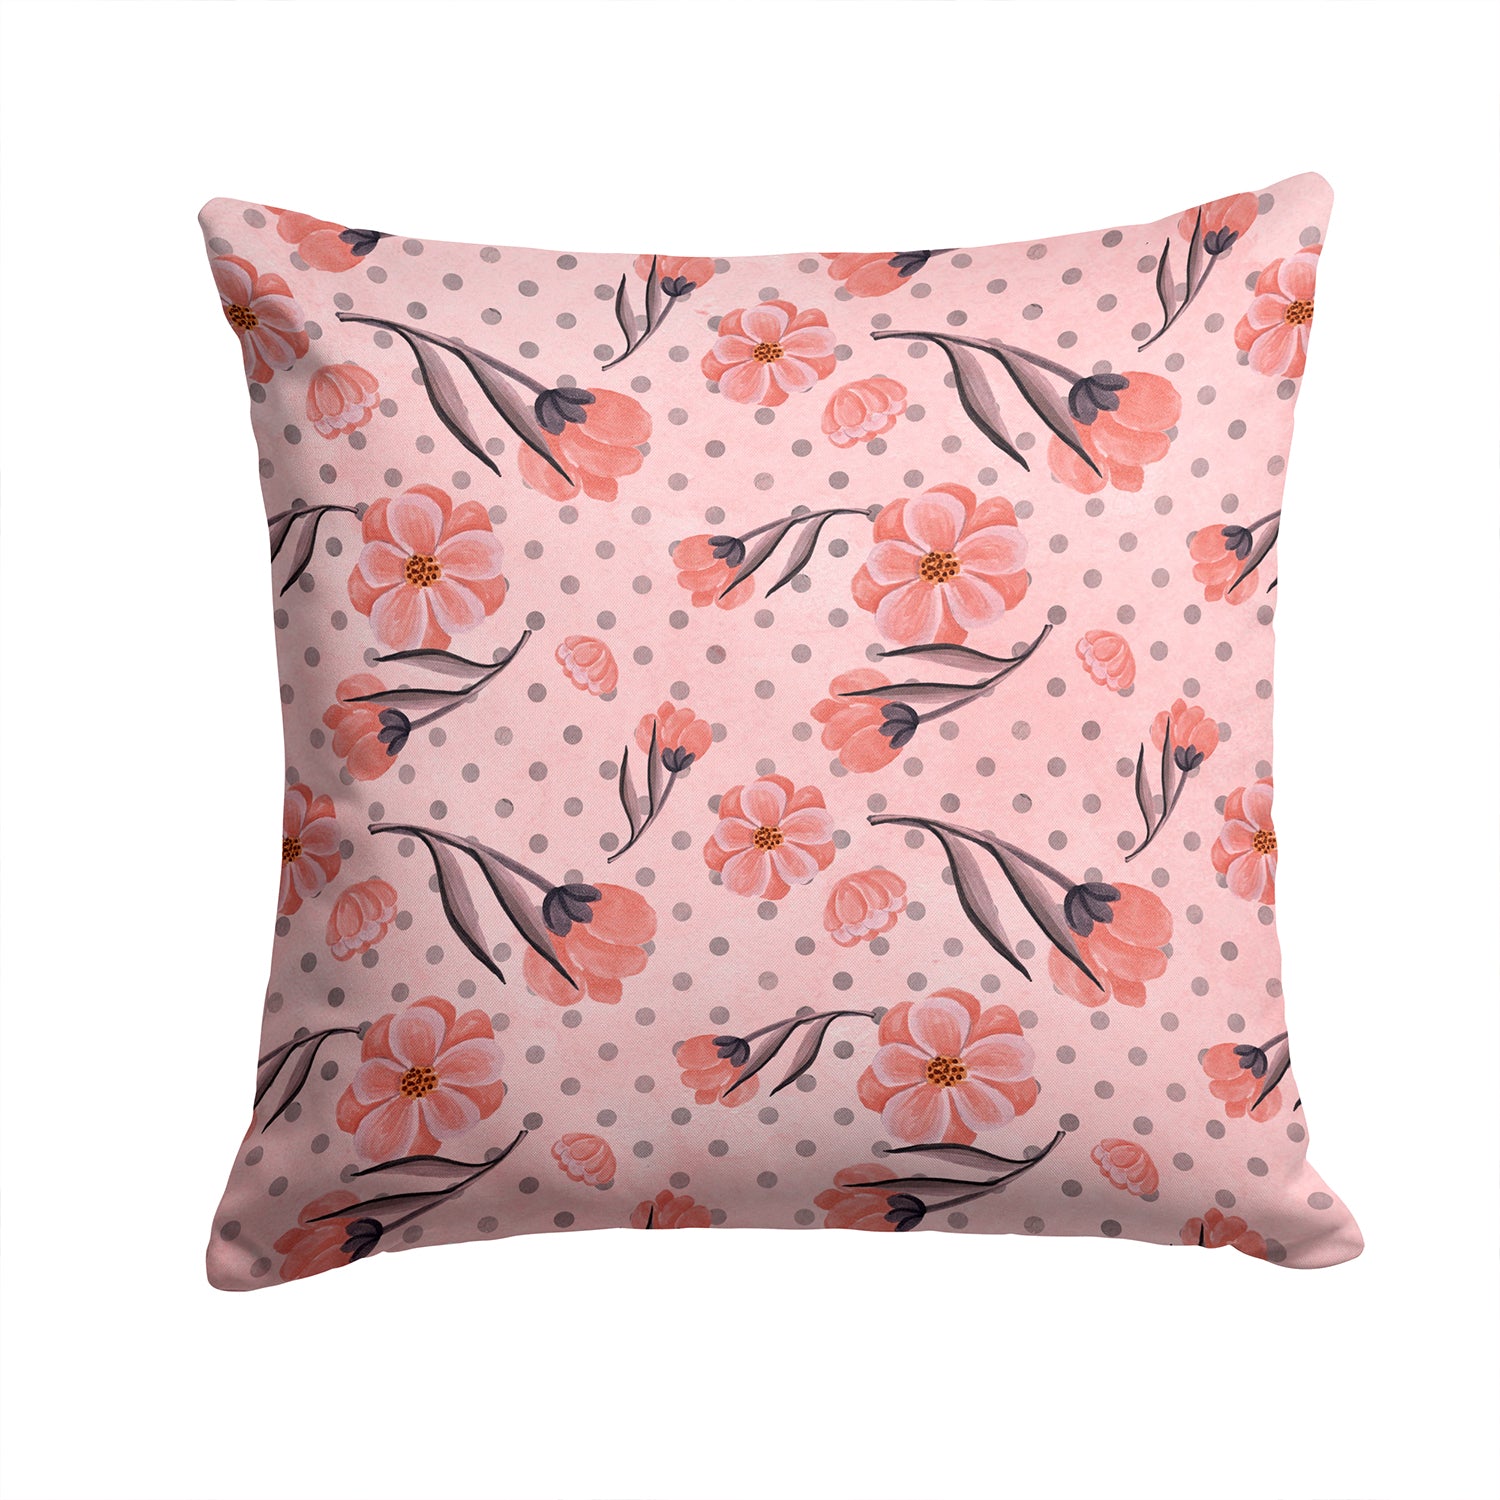 Pink Flowers and Polka Dots Fabric Decorative Pillow BB7499PW1414 - the-store.com